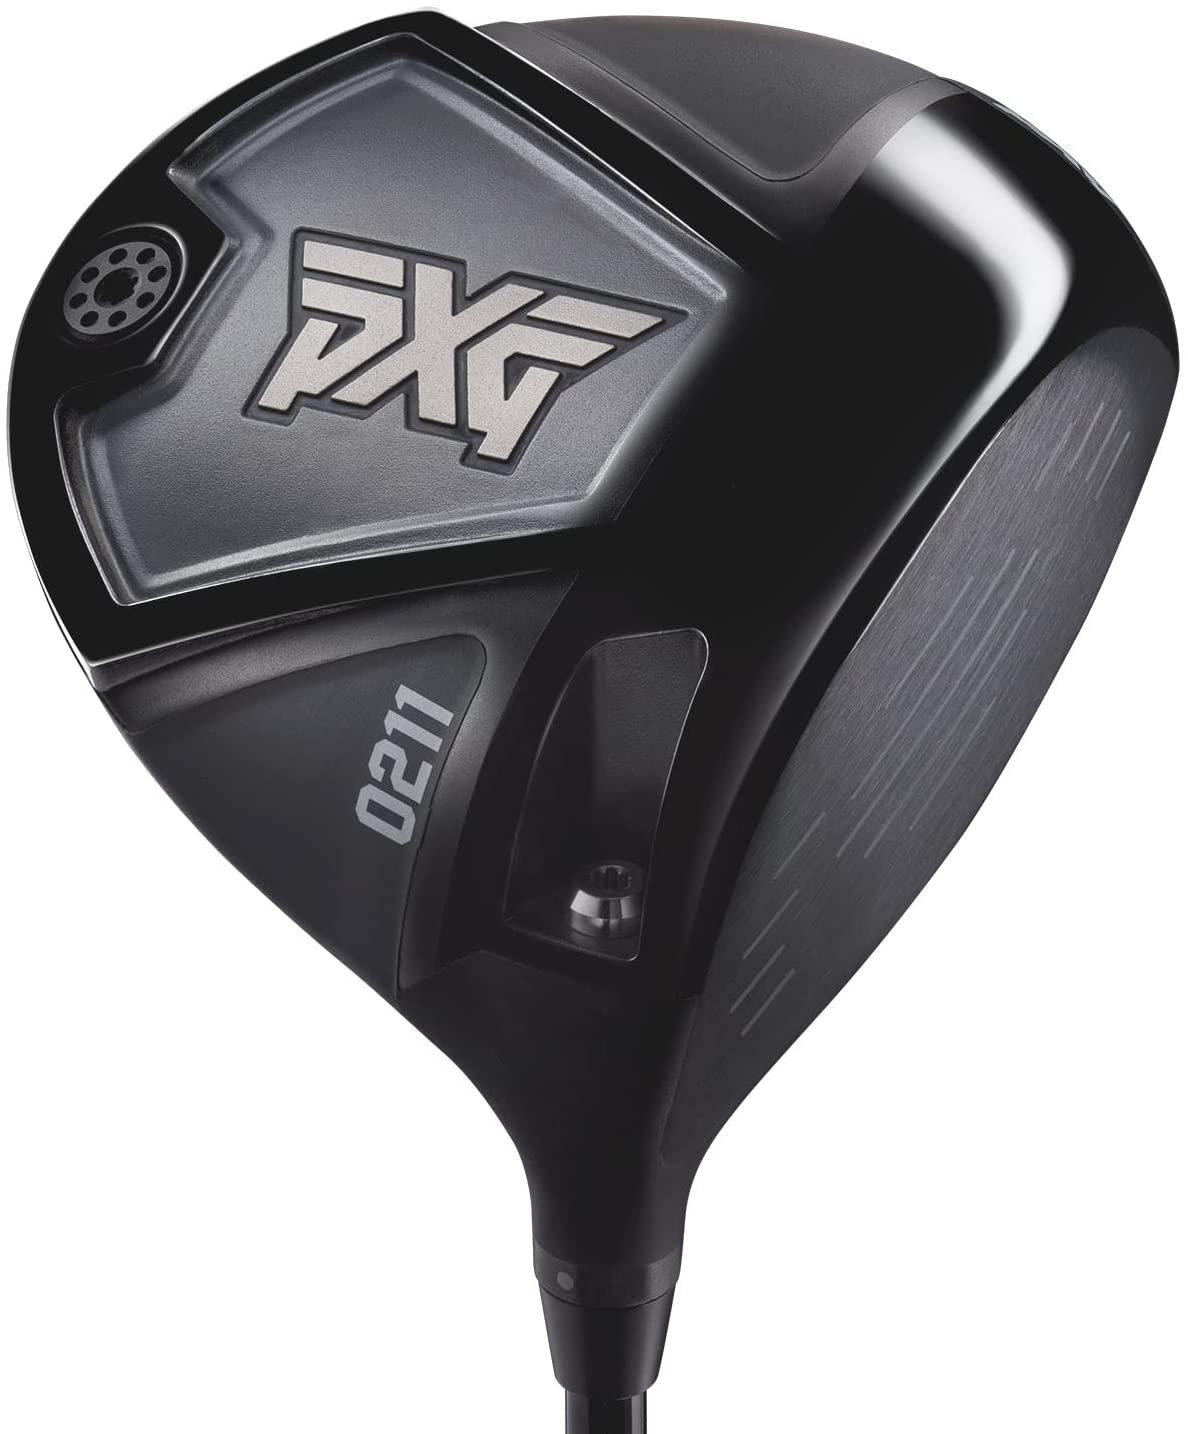 PXG 2021 0211 Drivers Review